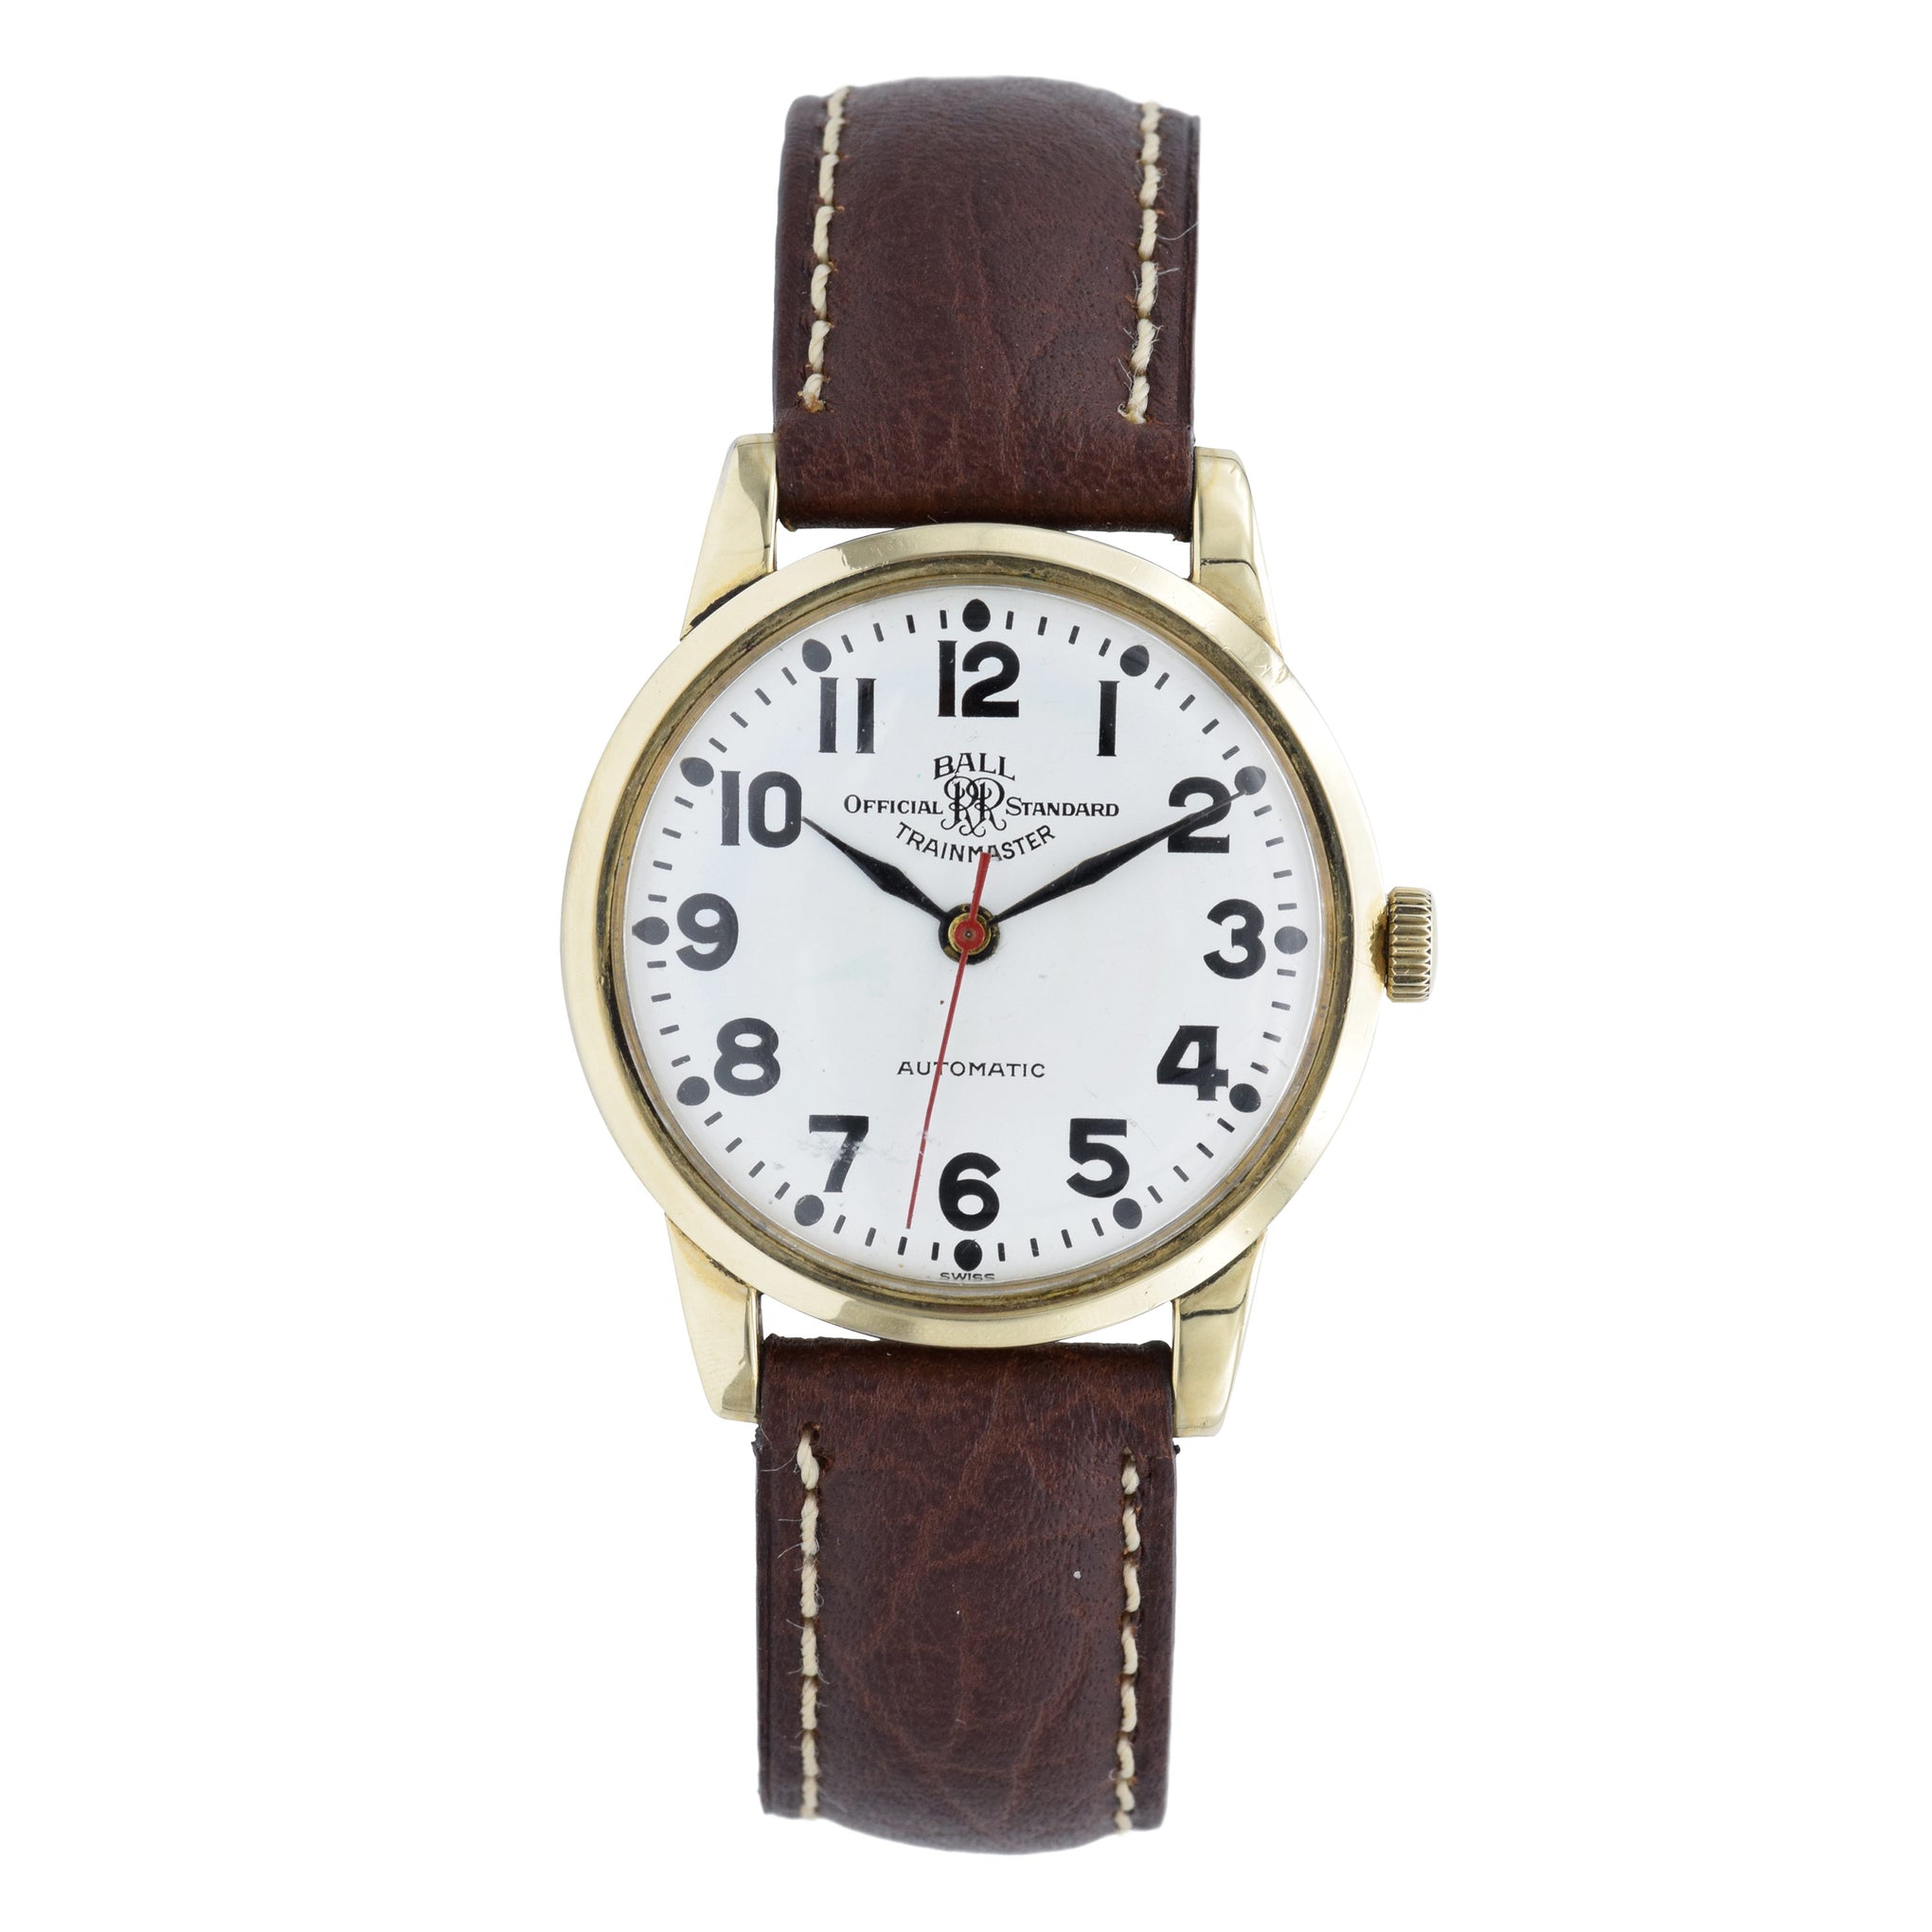 Vintage 1950s Ball Trainmaster Watch